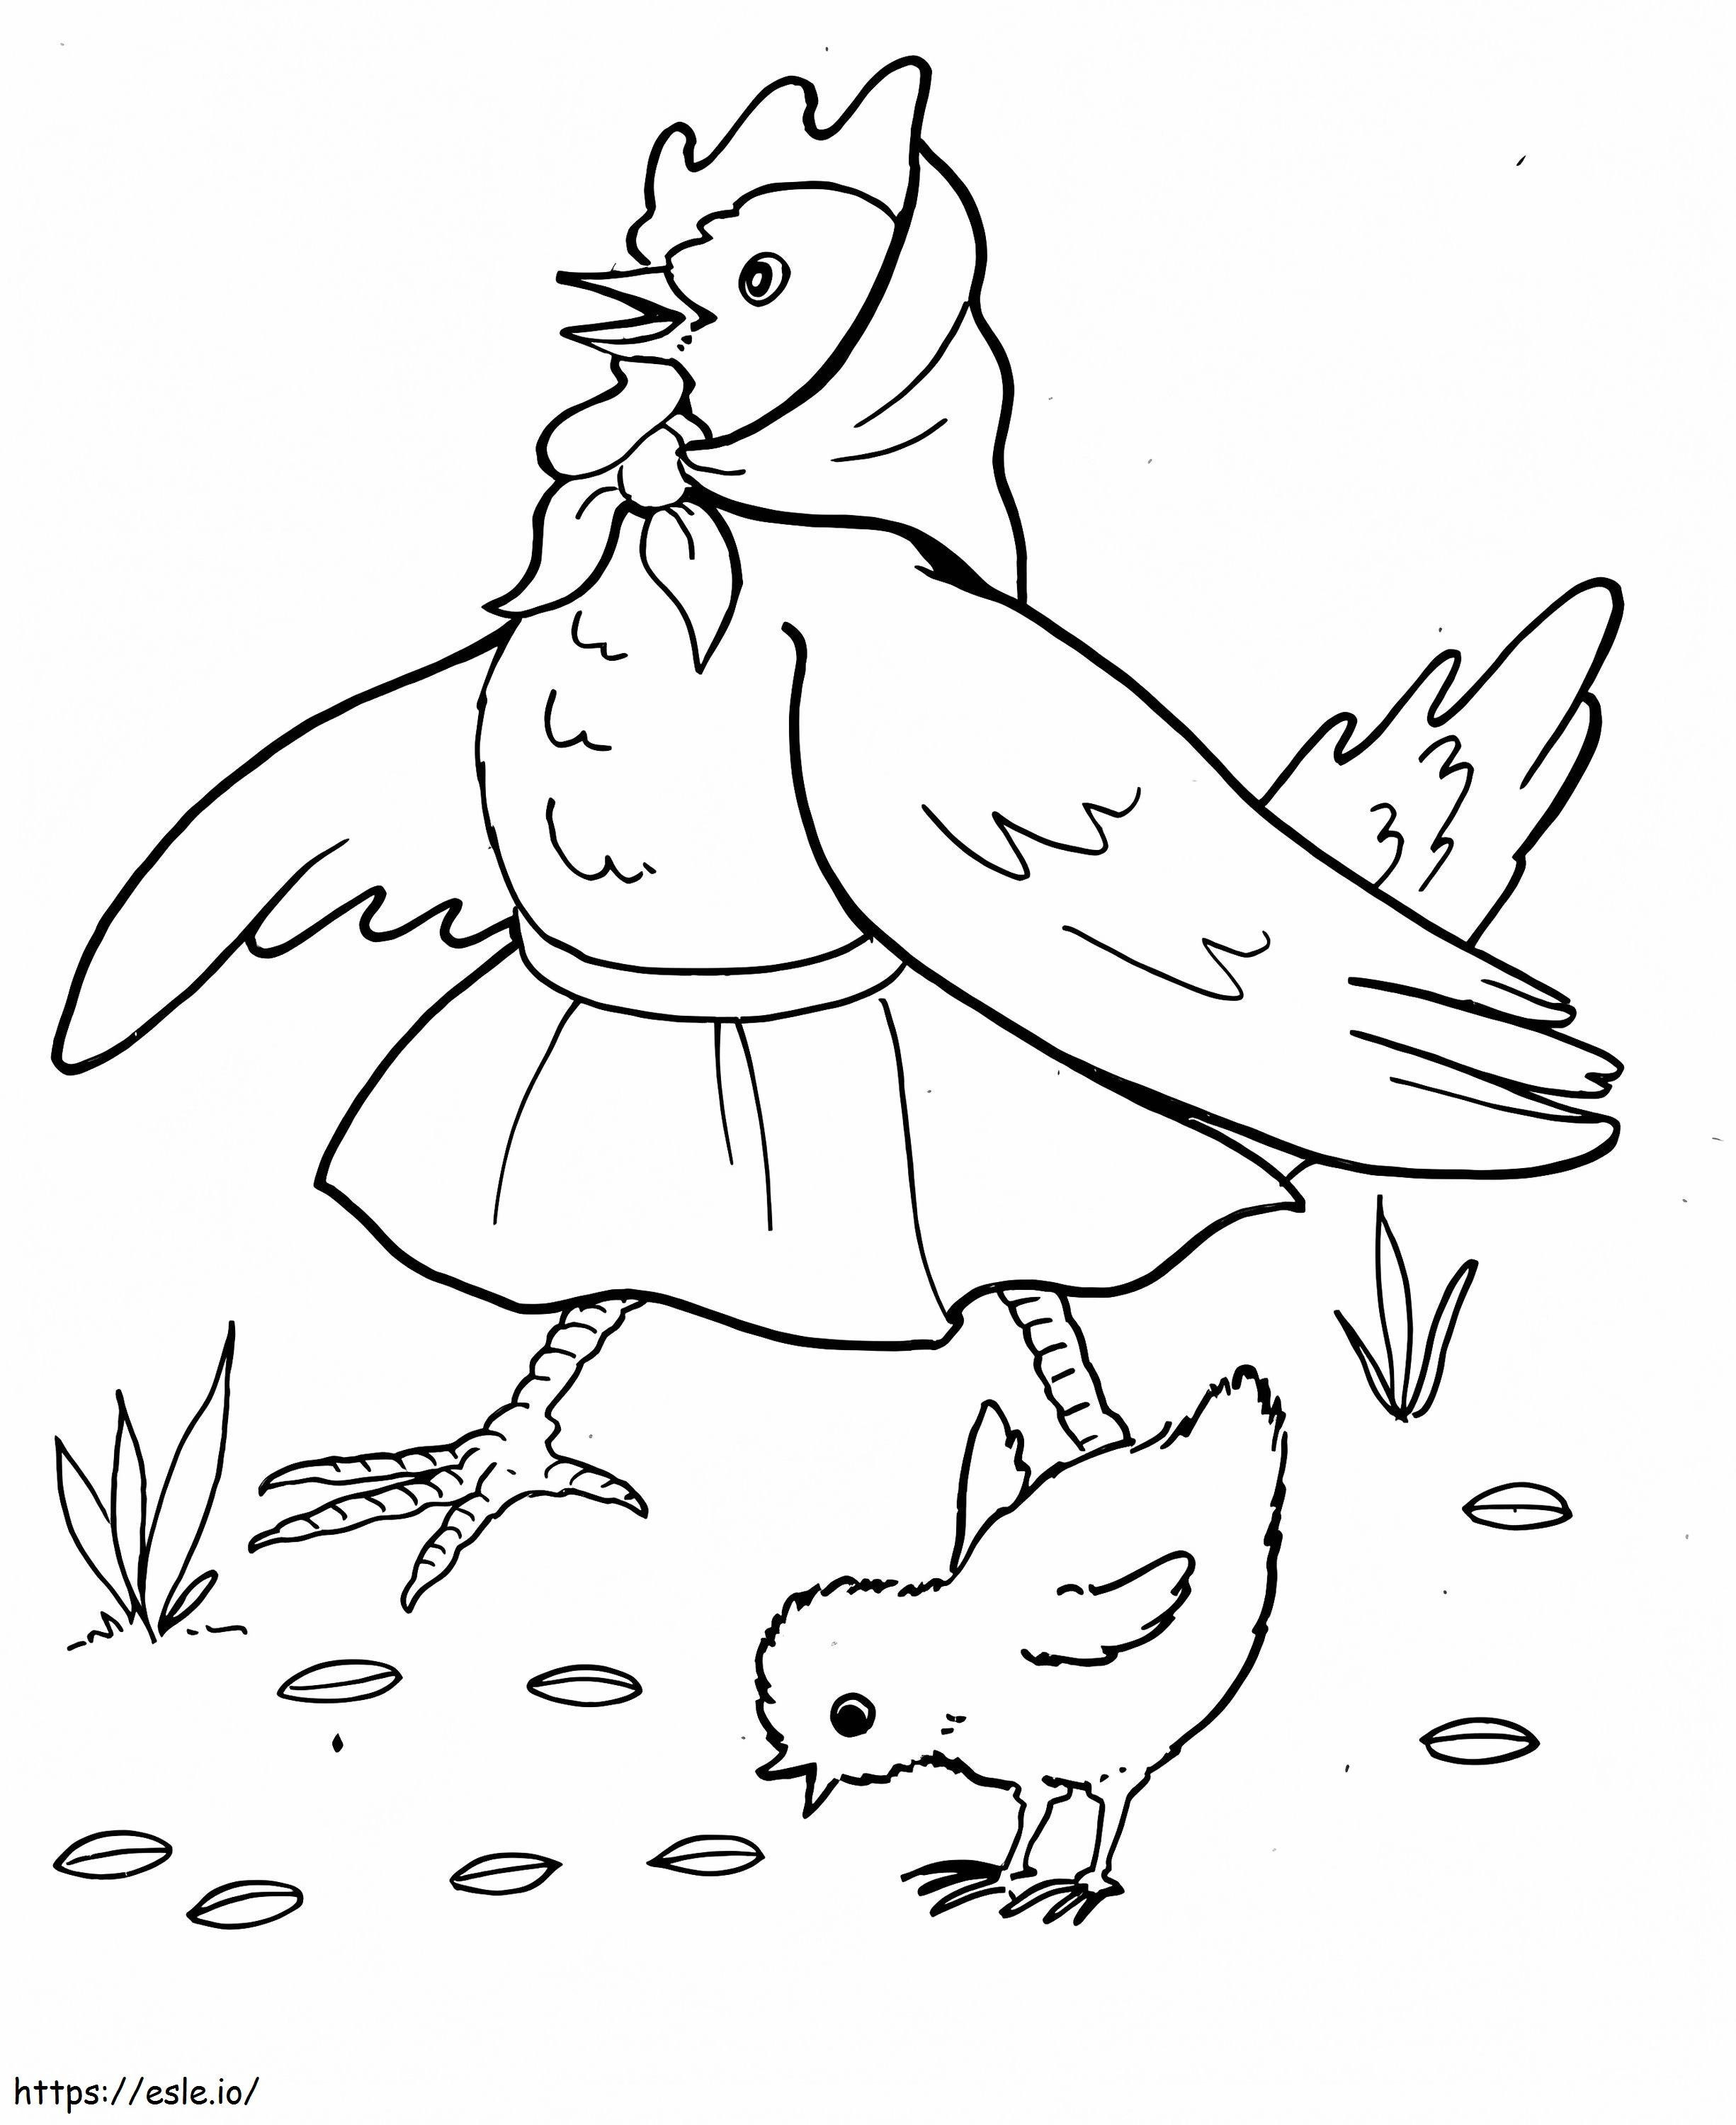 The Story Of The Little Red Hen Found Wheat coloring page